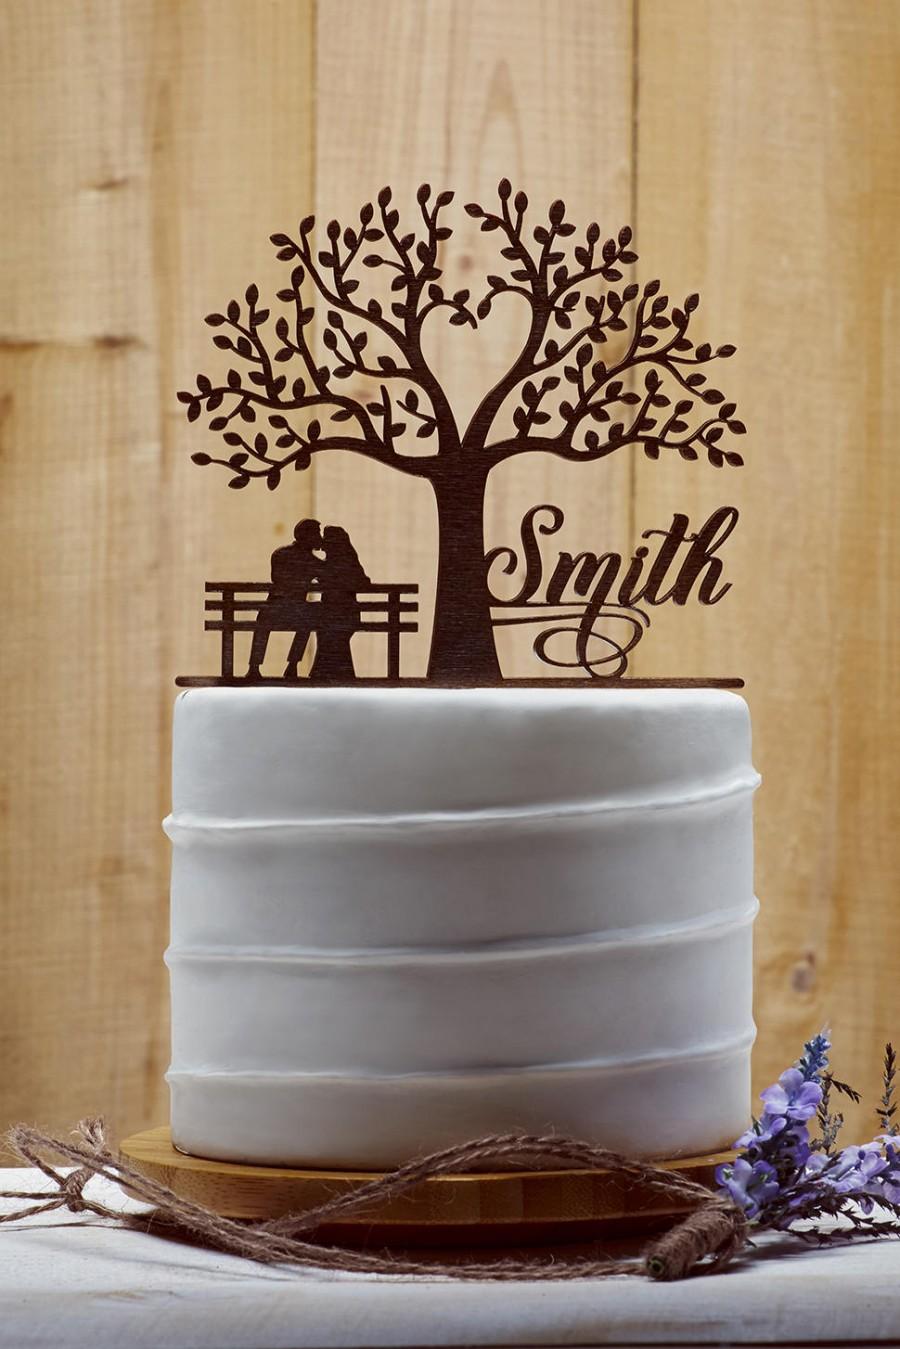 Mariage - Last Name Cake Topper Customized Wedding Cake Topper, Personalized Cake Topper for Wedding, Custom Personalized Wedding Cake Topper - 04